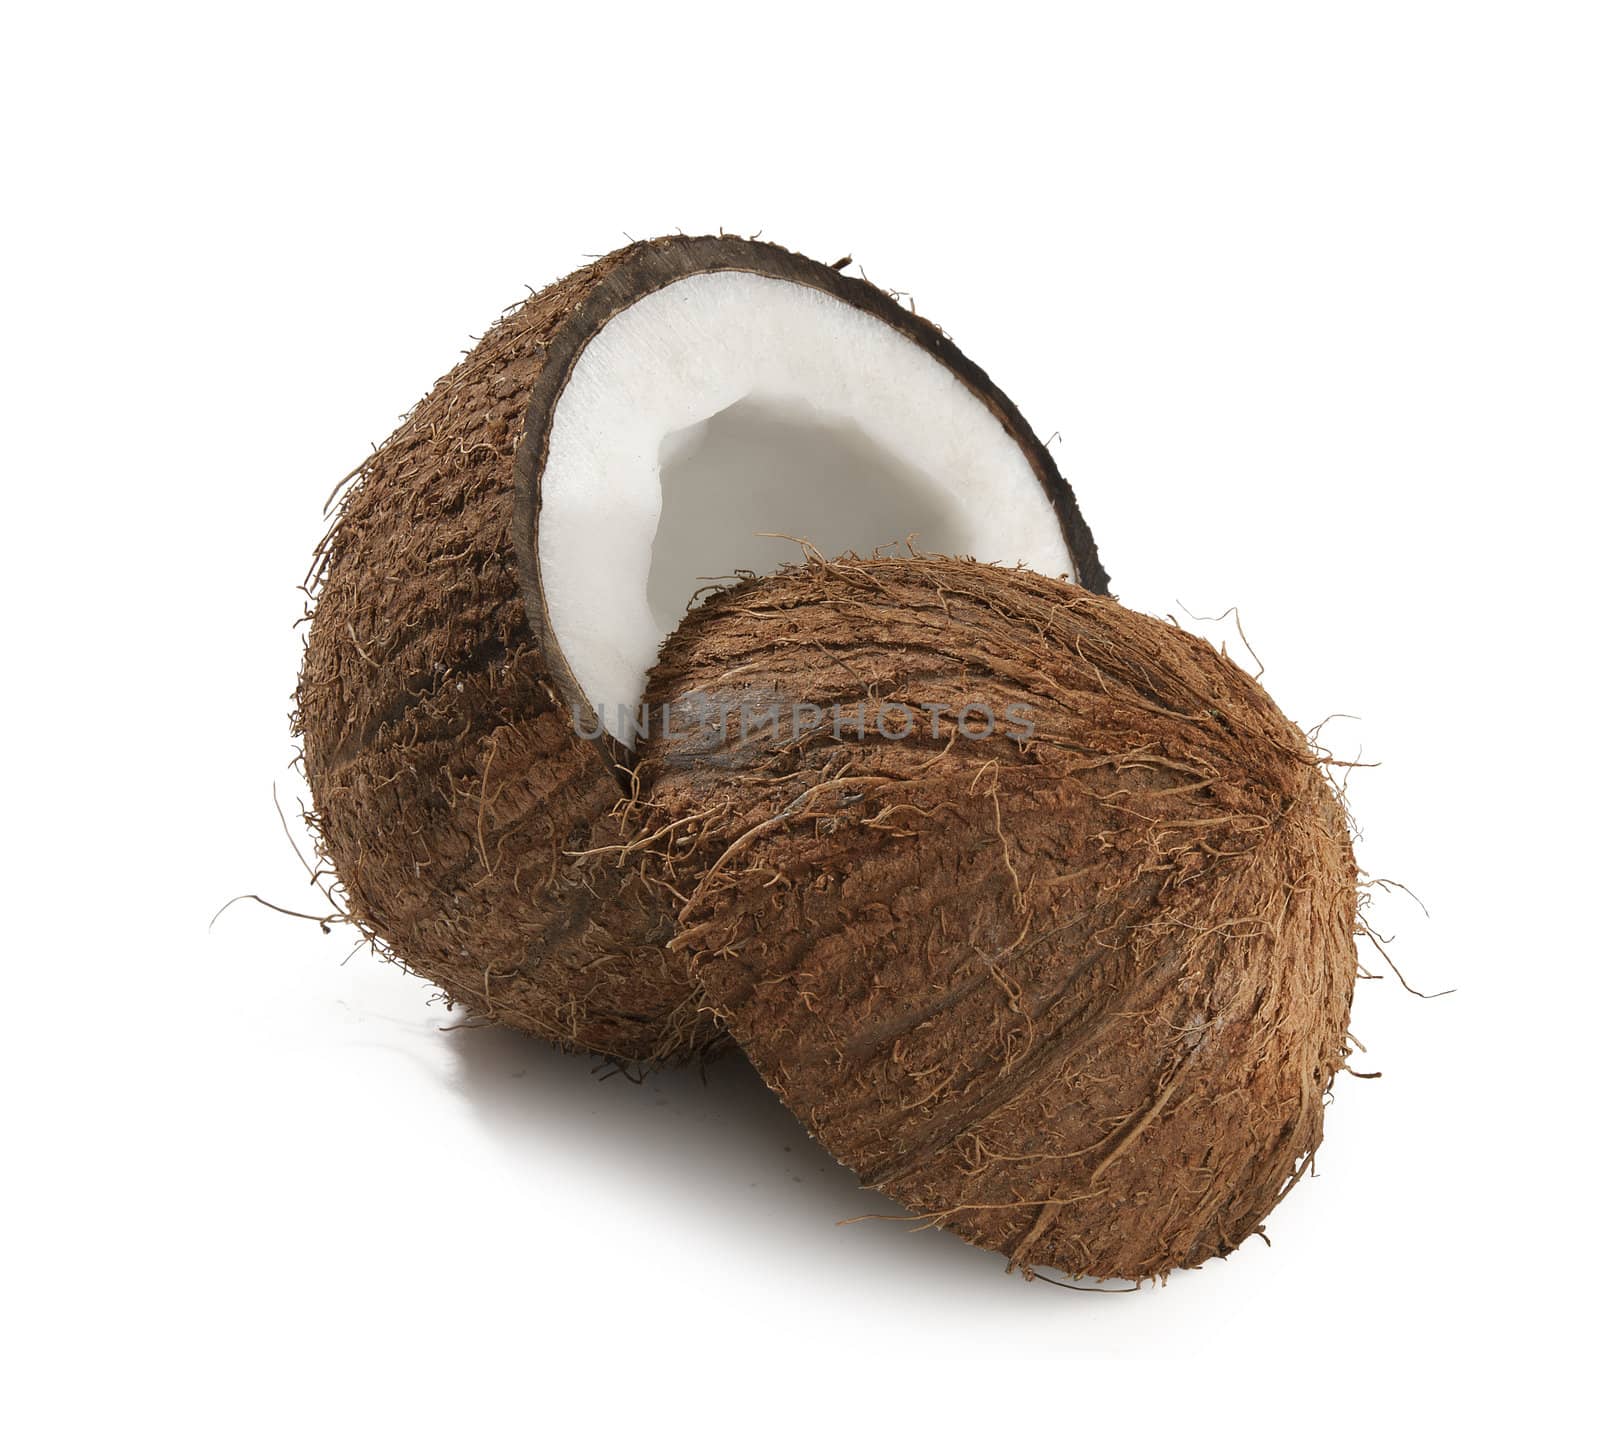 One opened coconut on the white background